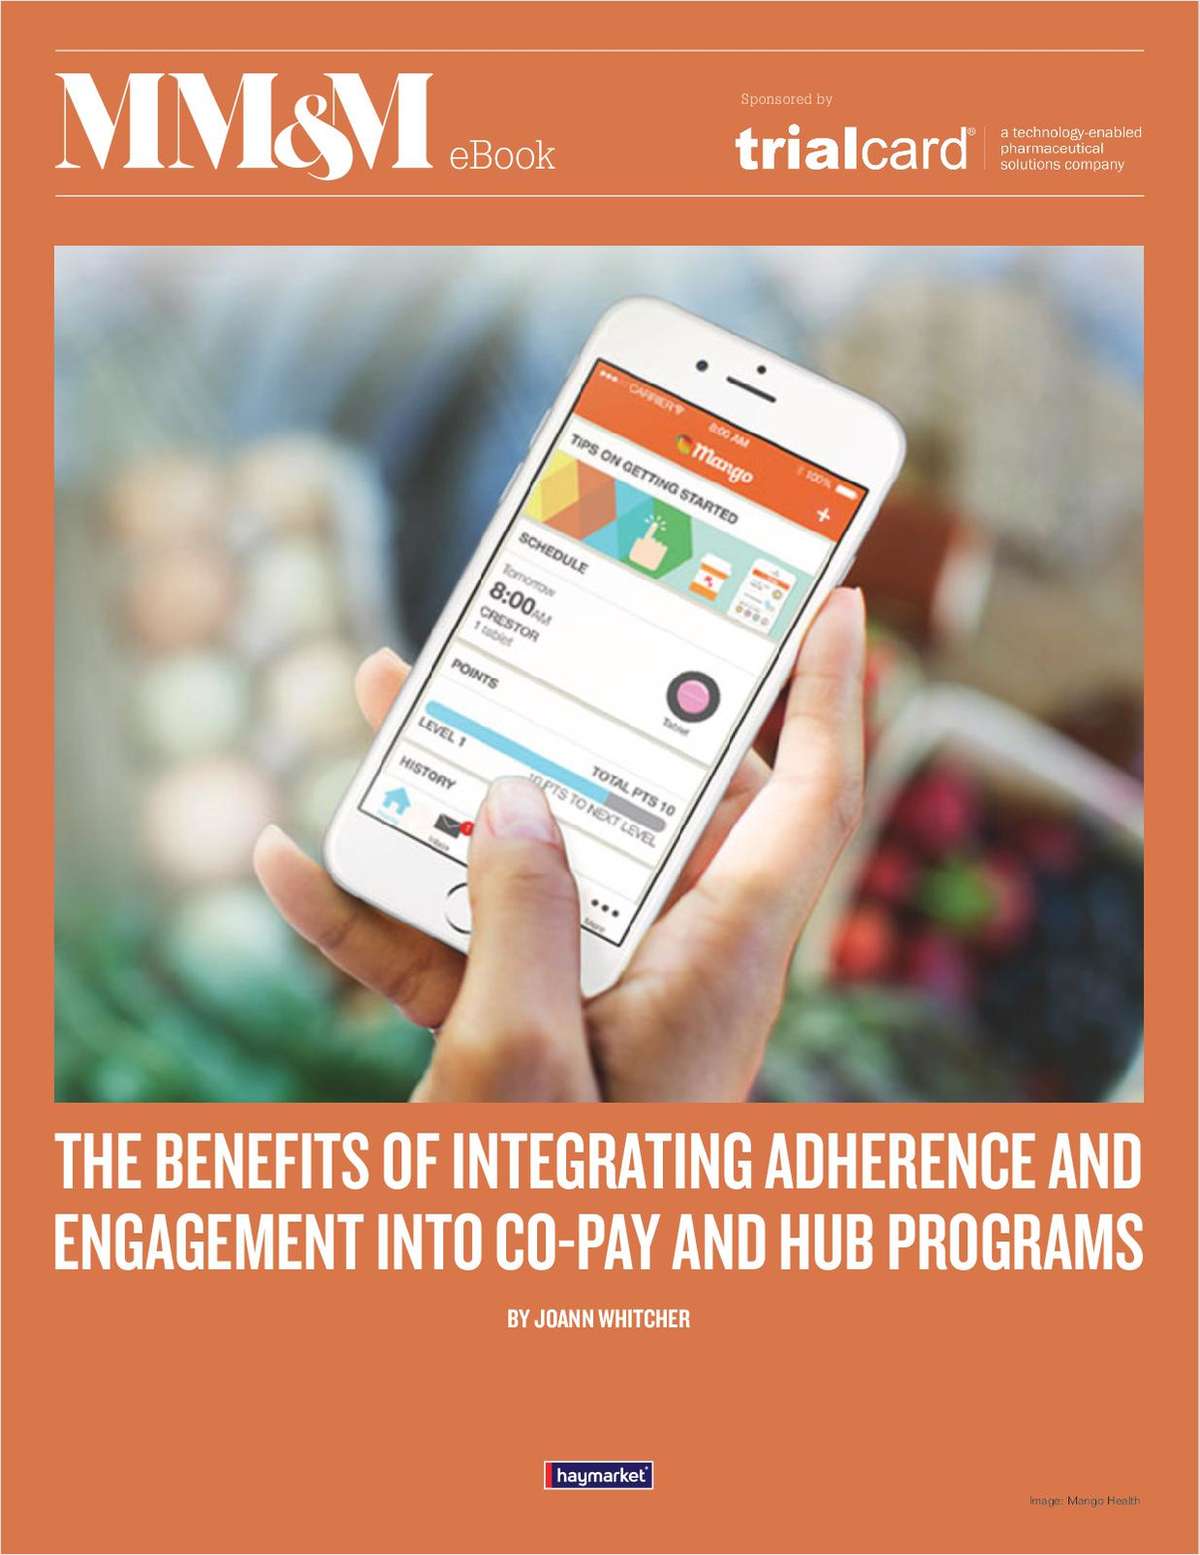 The Benefits of Integrating Adherence and Engagement into Co-pay and Hub Programs